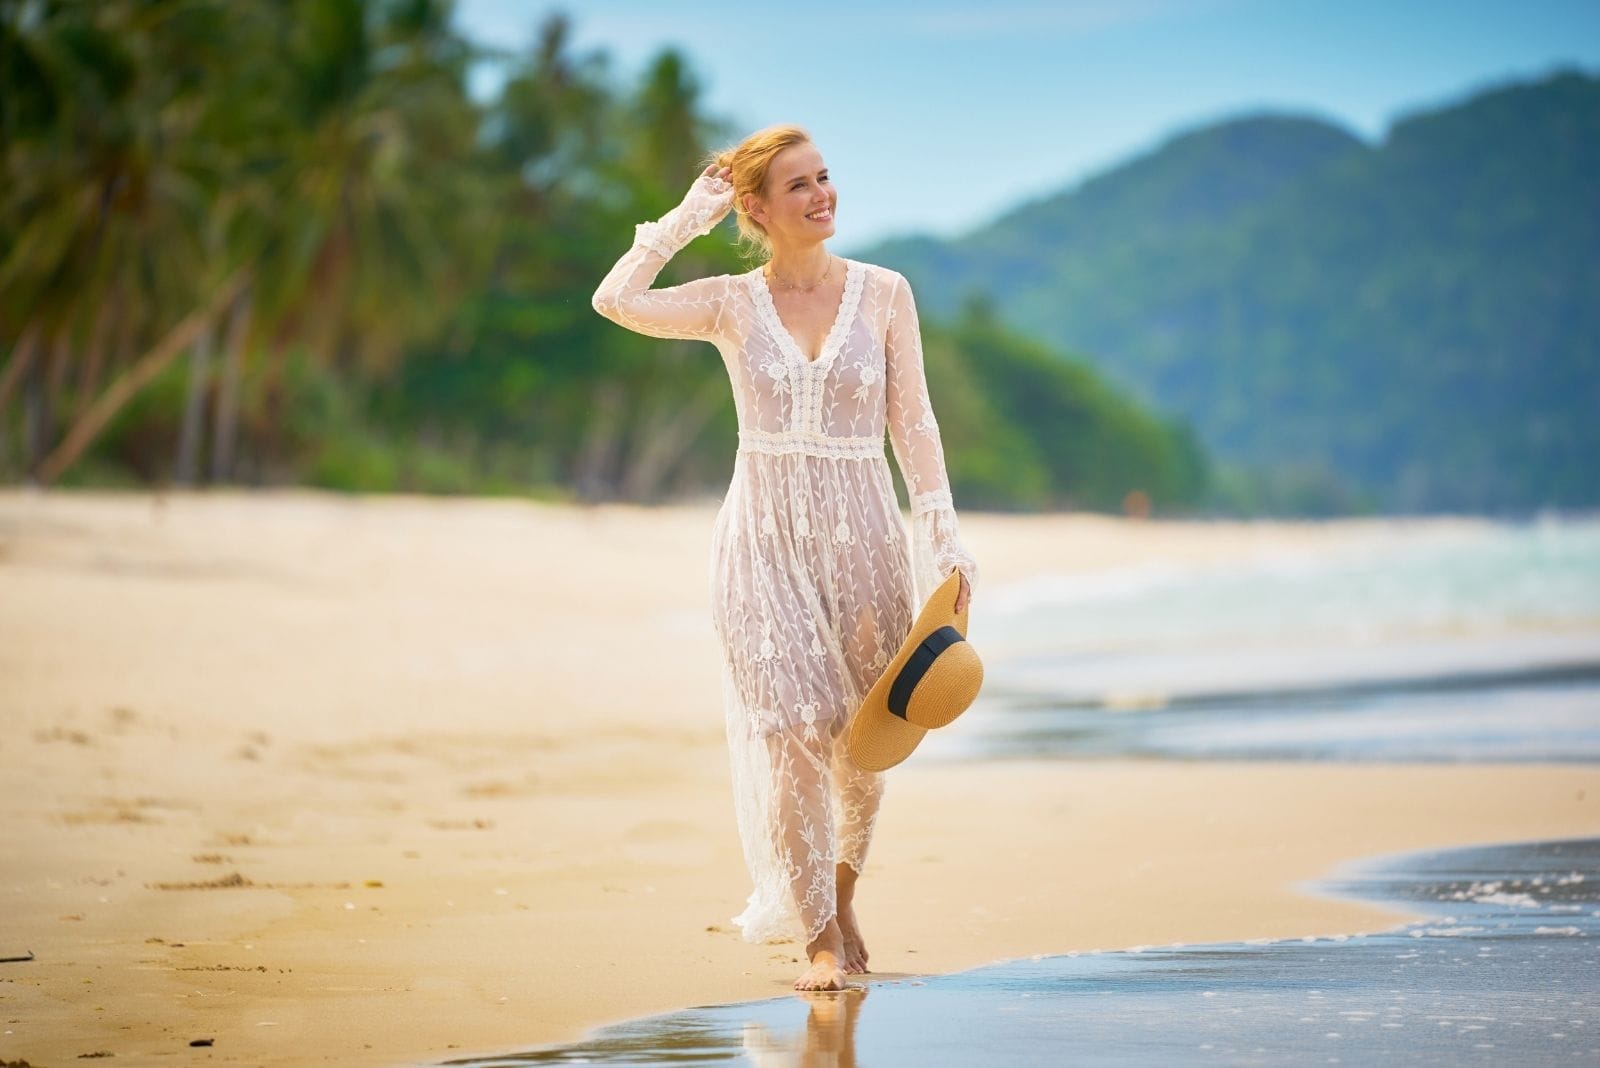 woman walking alone the shore of the beach trying to put her hair down and holding a hat smiling